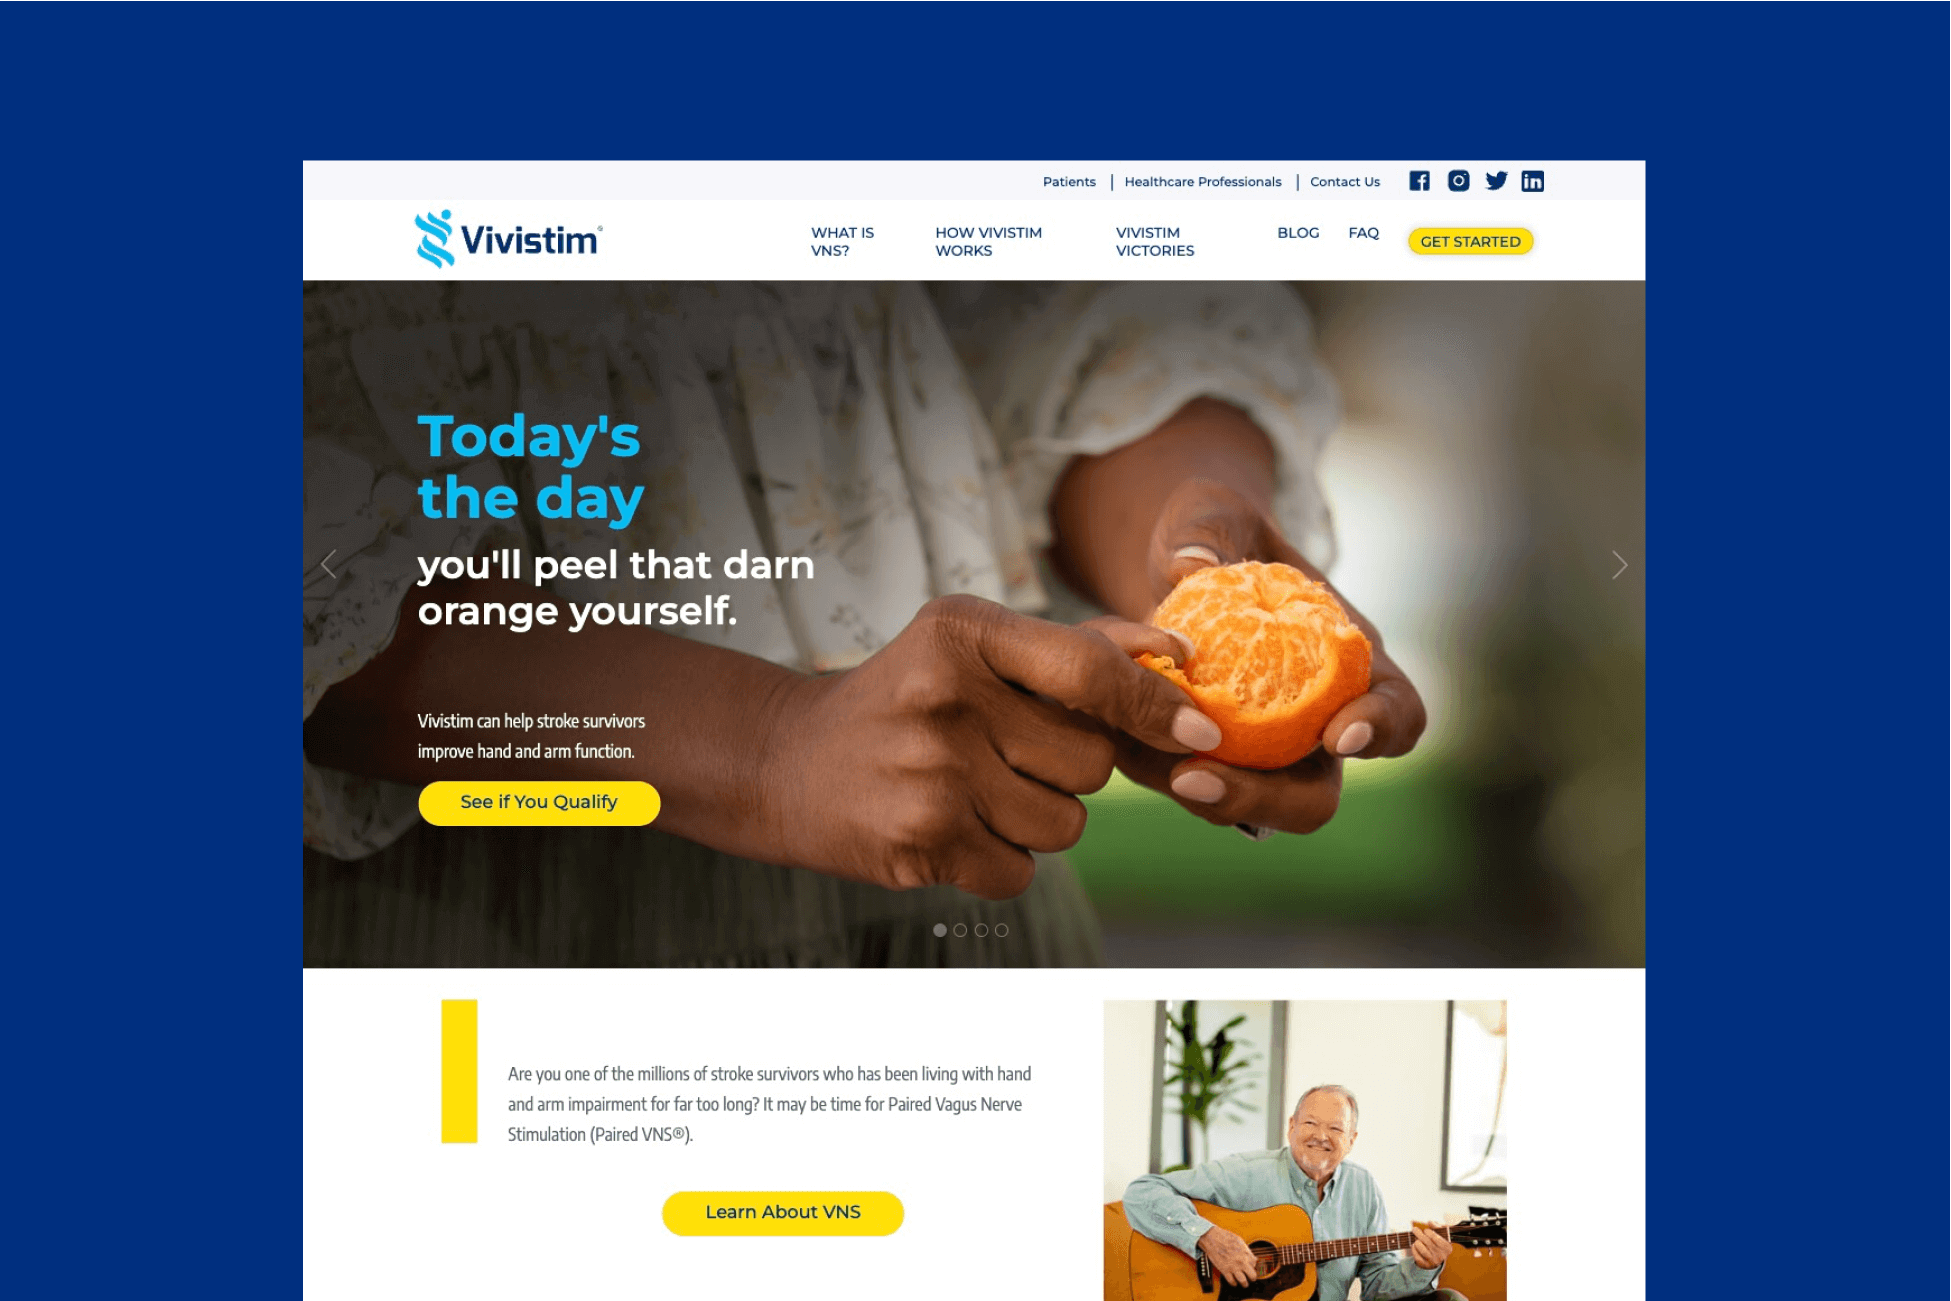 Vivistim's homepage featuring a hero image of someone peeling an orange with the caption "Today's the day you'll peel that darn orange yourself"